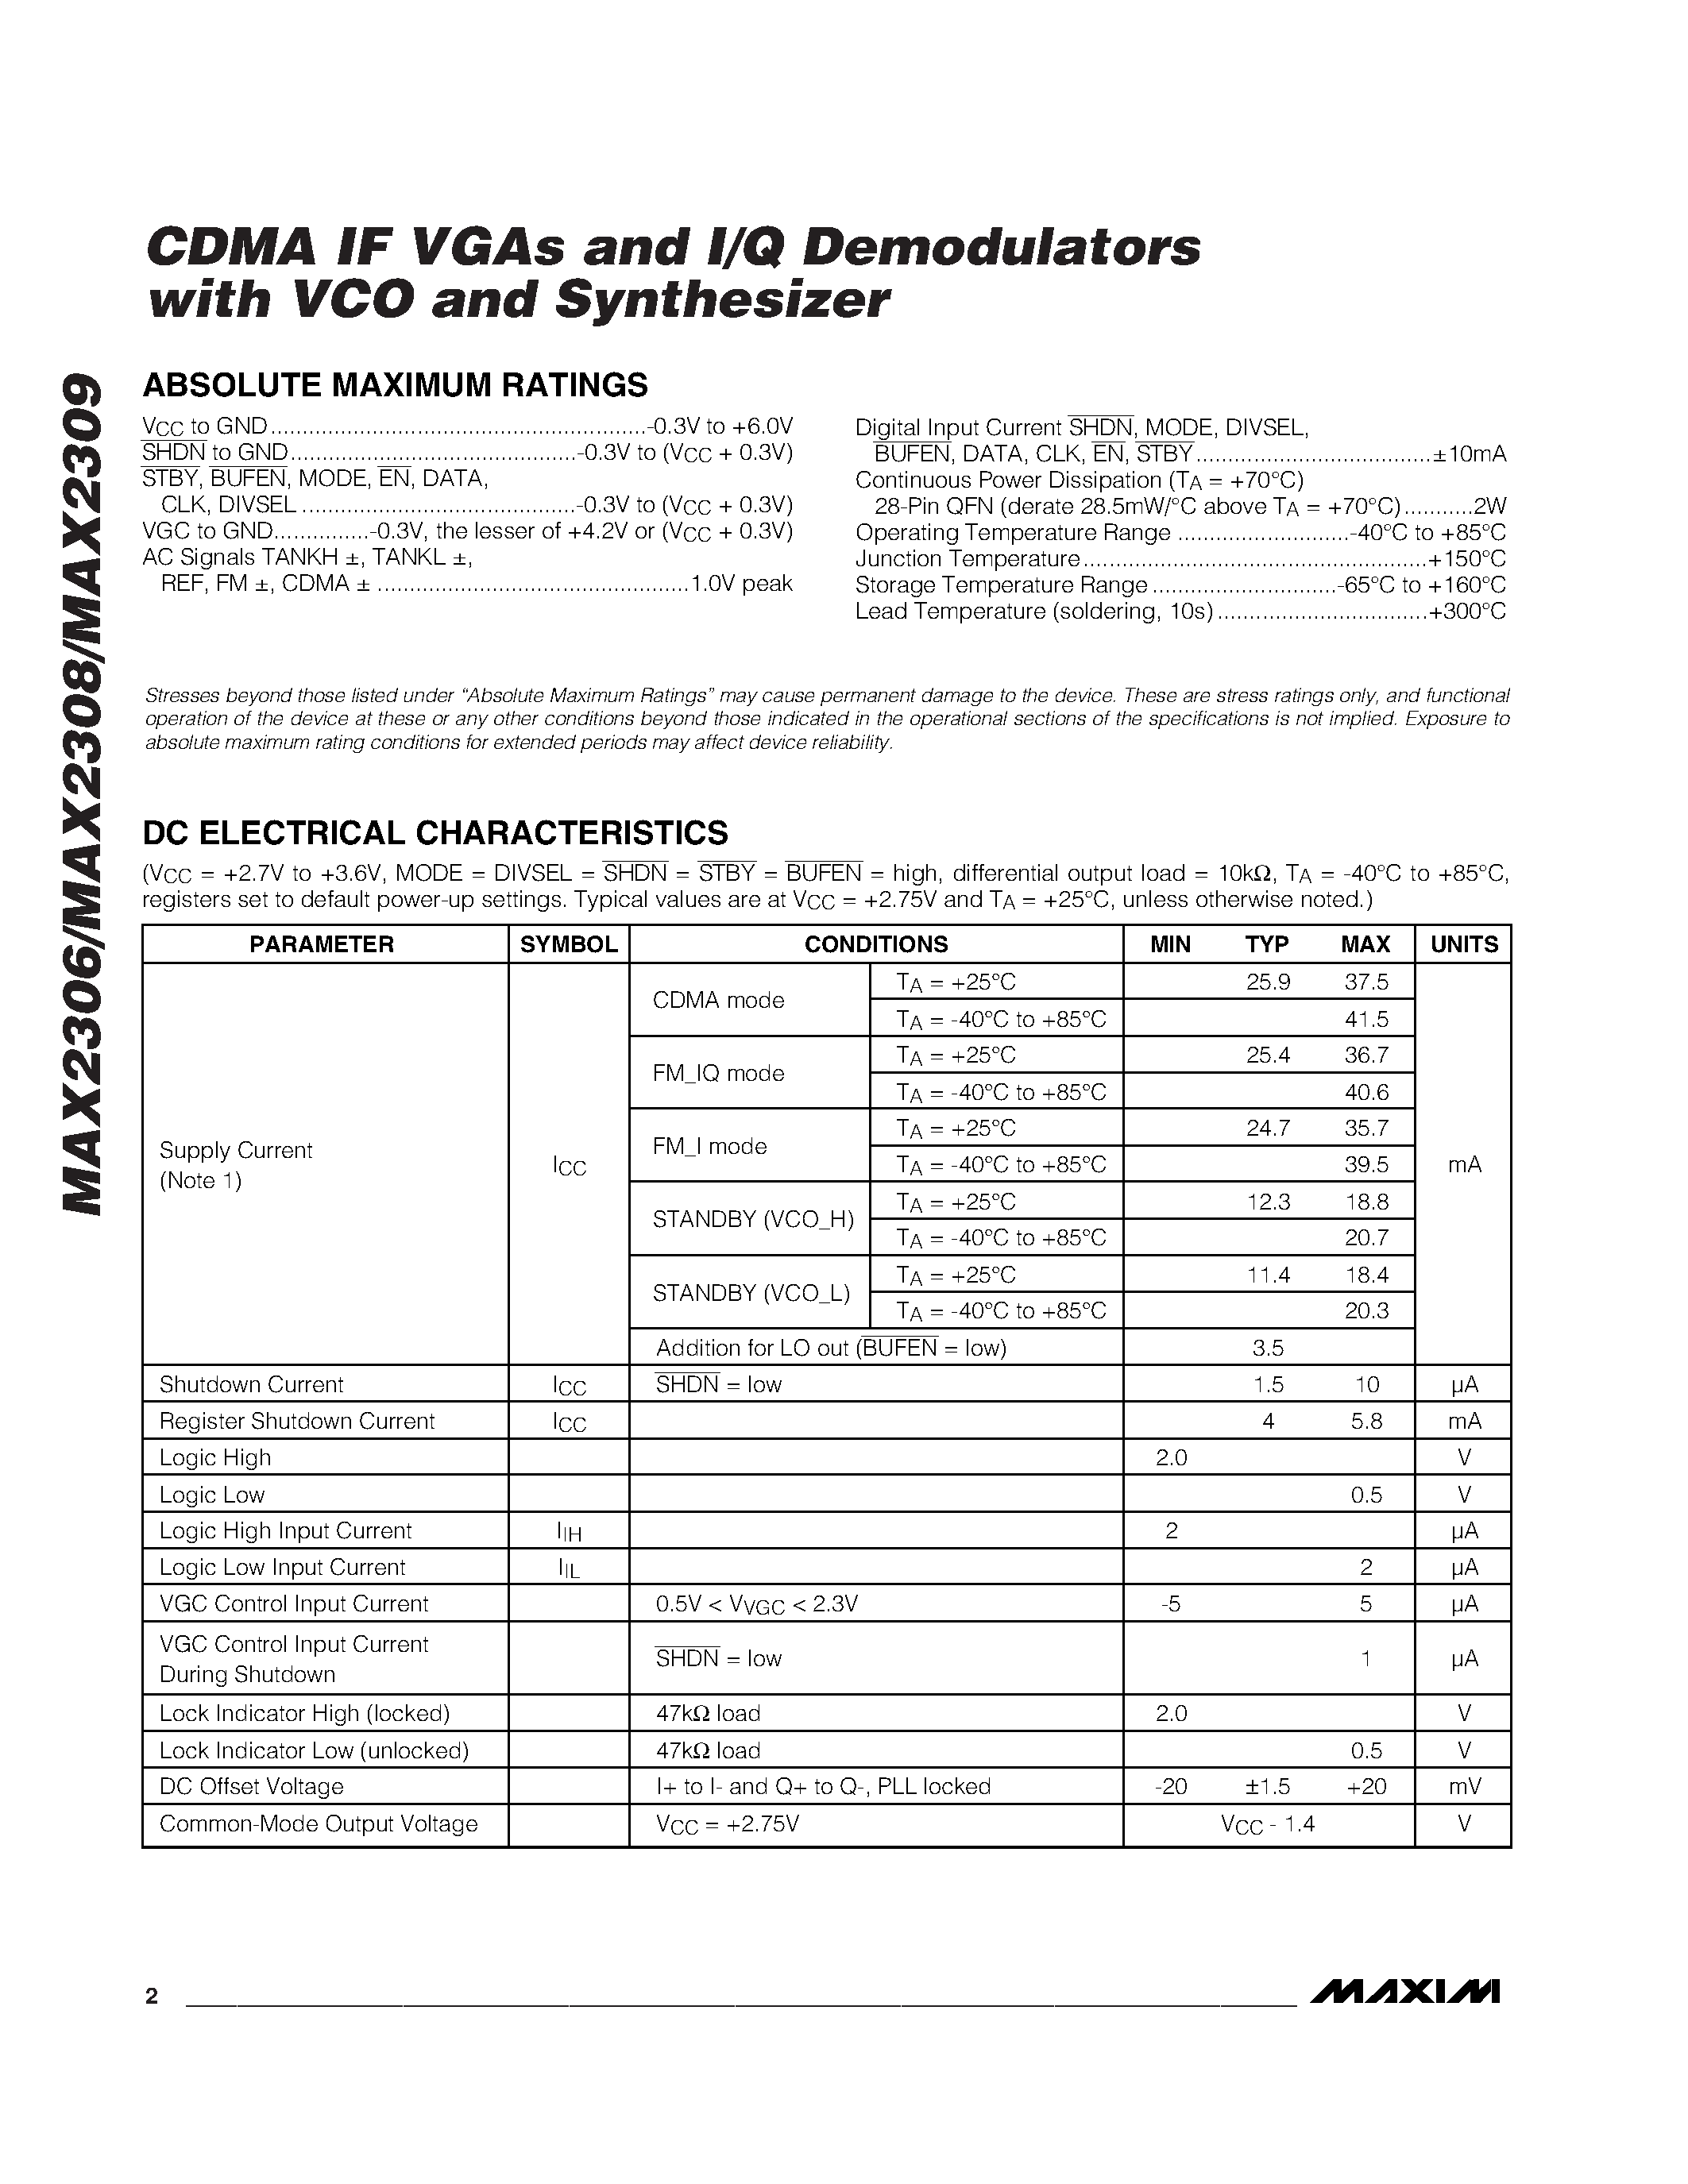 Даташит MAX2306 - CDMA IF VGAs and I/Q Demodulators with VCO and Synthesizer страница 2